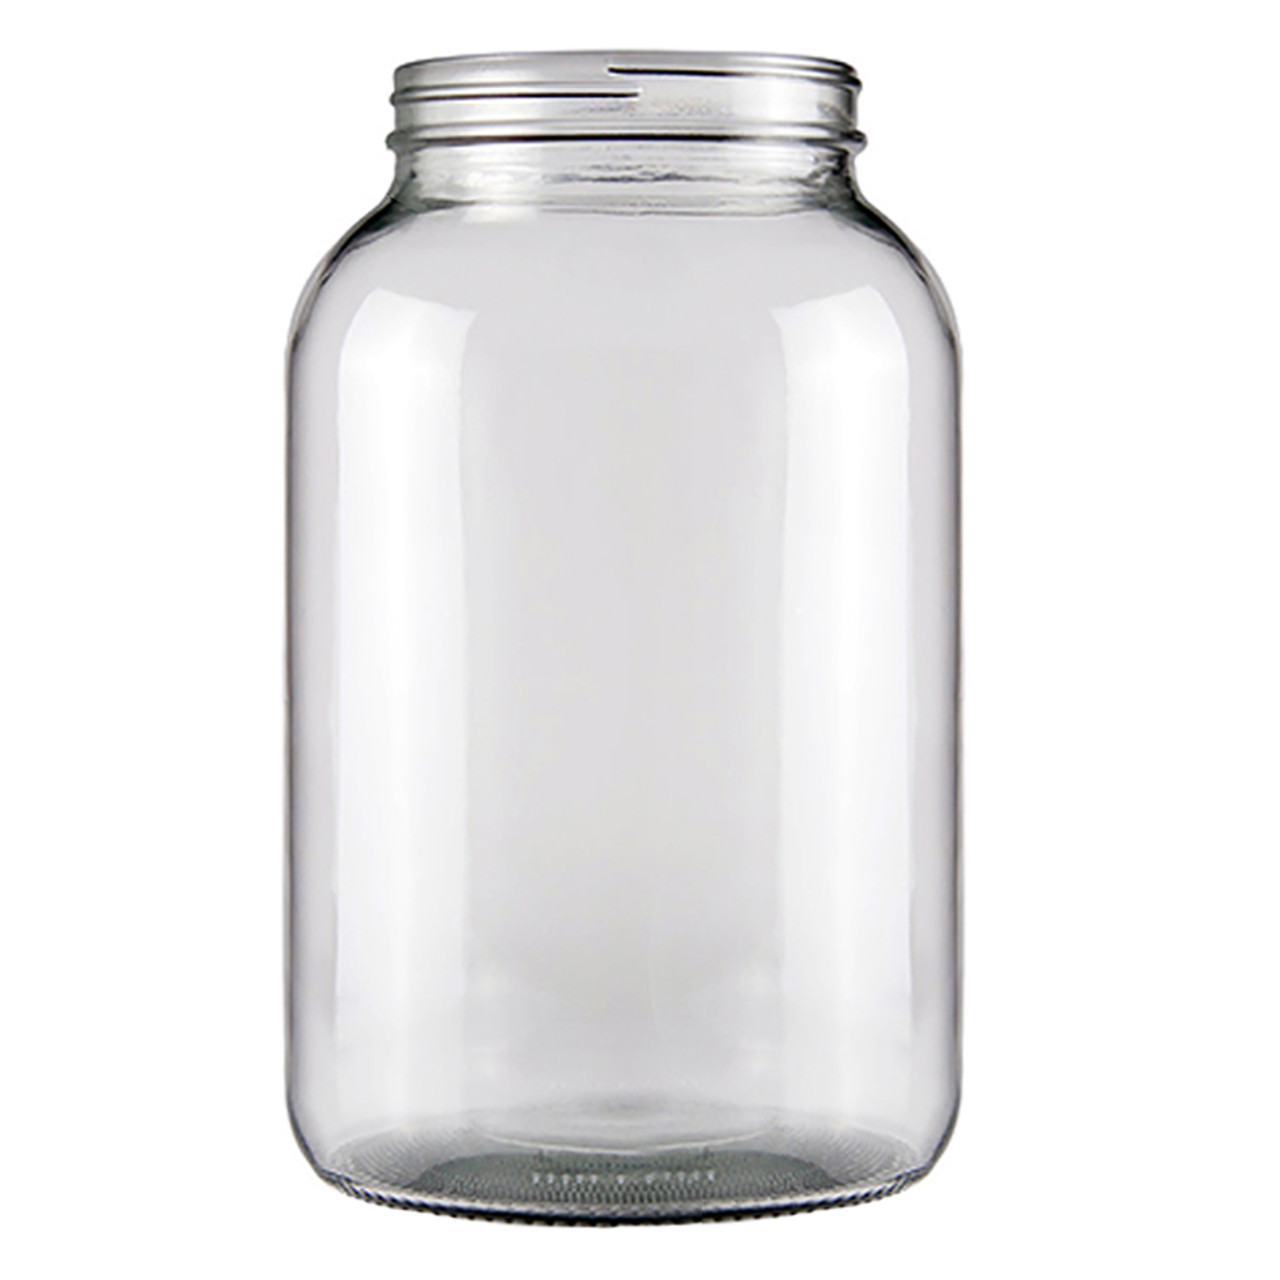 https://cdn11.bigcommerce.com/s-1x0gz1809s/images/stencil/1280x1280/products/4602/13704/1%20gallon%20wide%20mouth%20jar%20no%20lid%20bc10__23546.1652476084.jpg?c=2